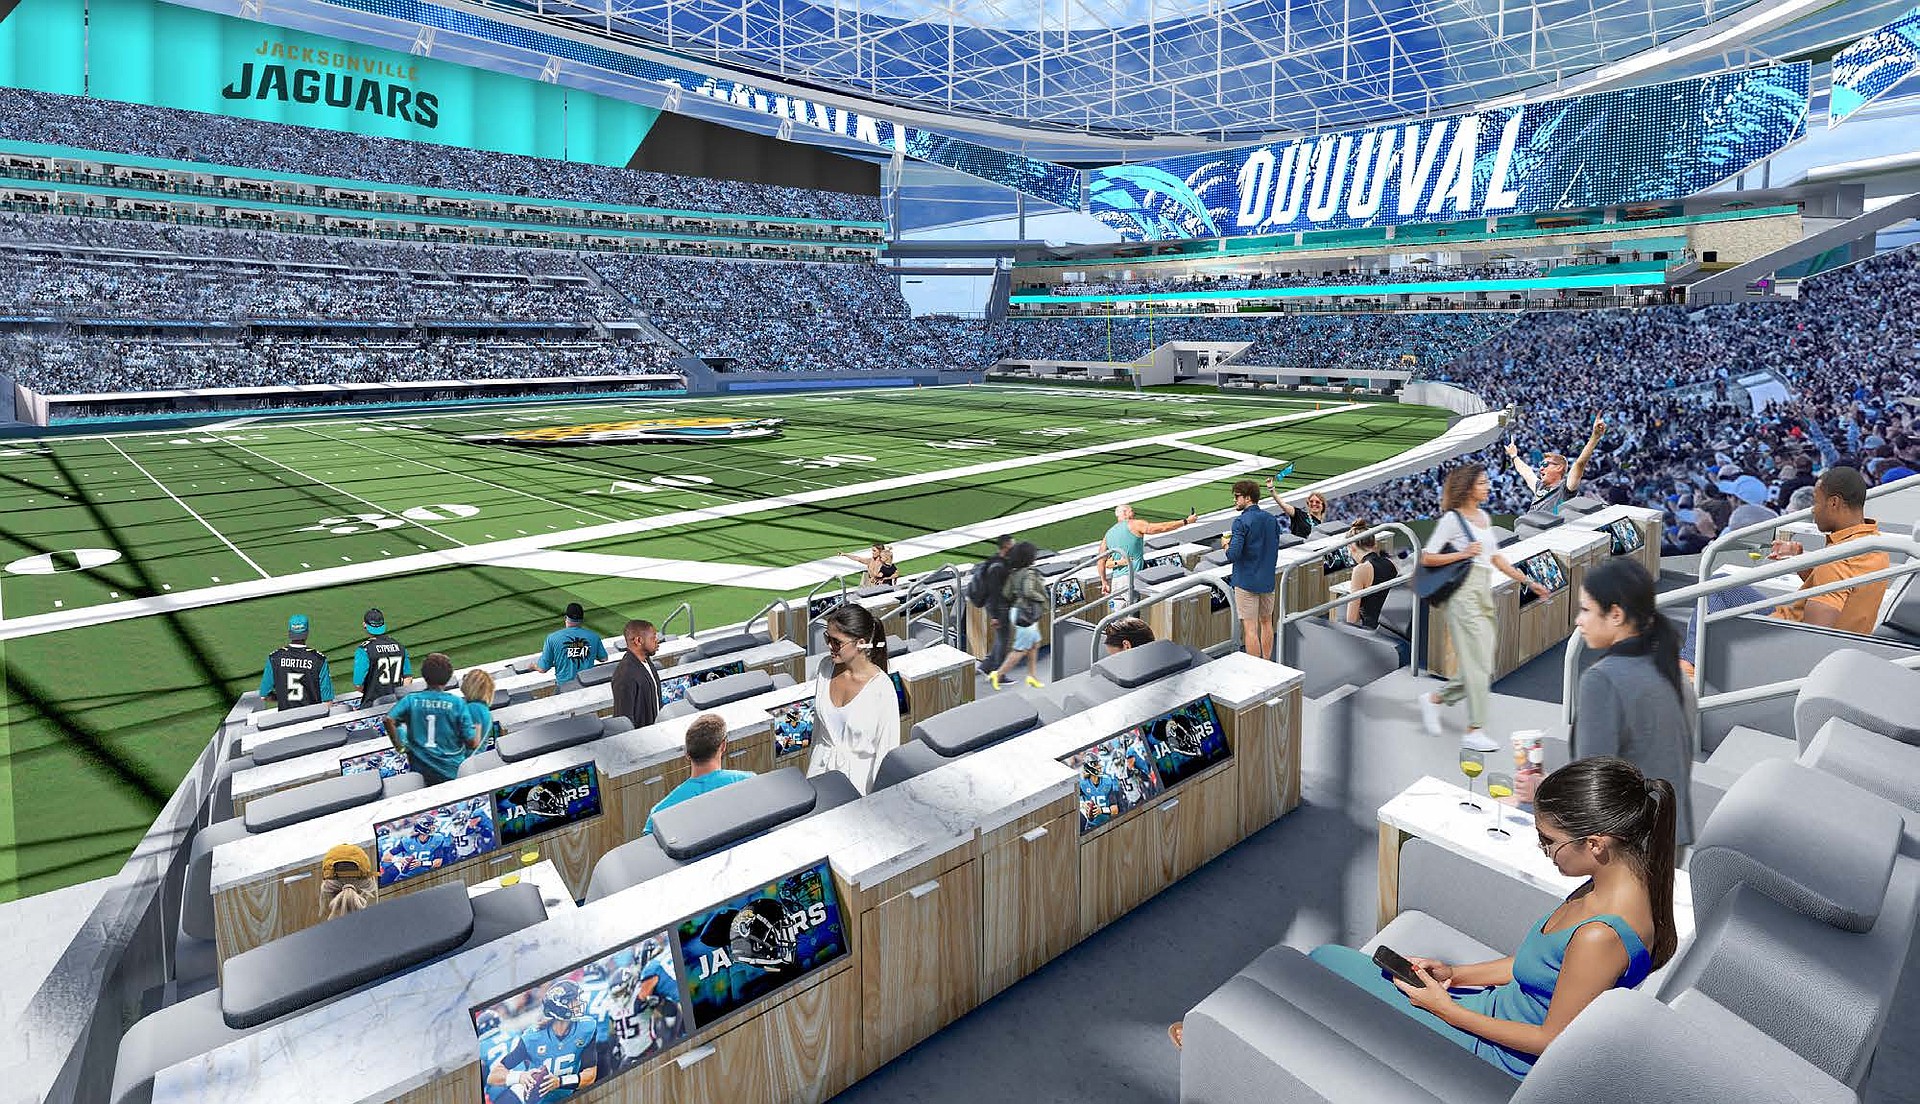 Some seats in the Jacksonville Jaguars Stadium include multiple video screens and marble counters.